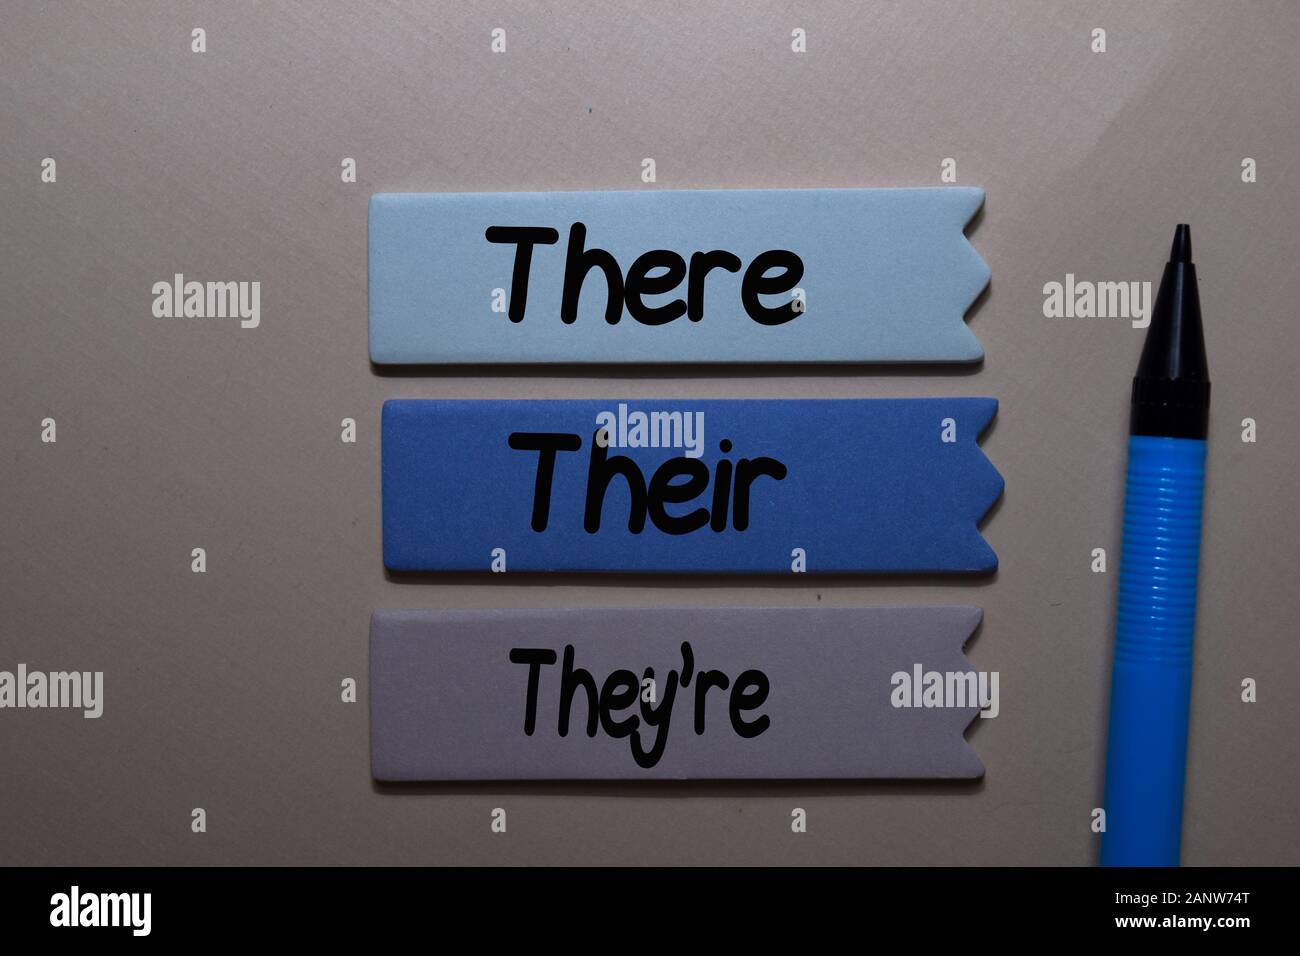 Use of There - Learn the concept of There - Grammar